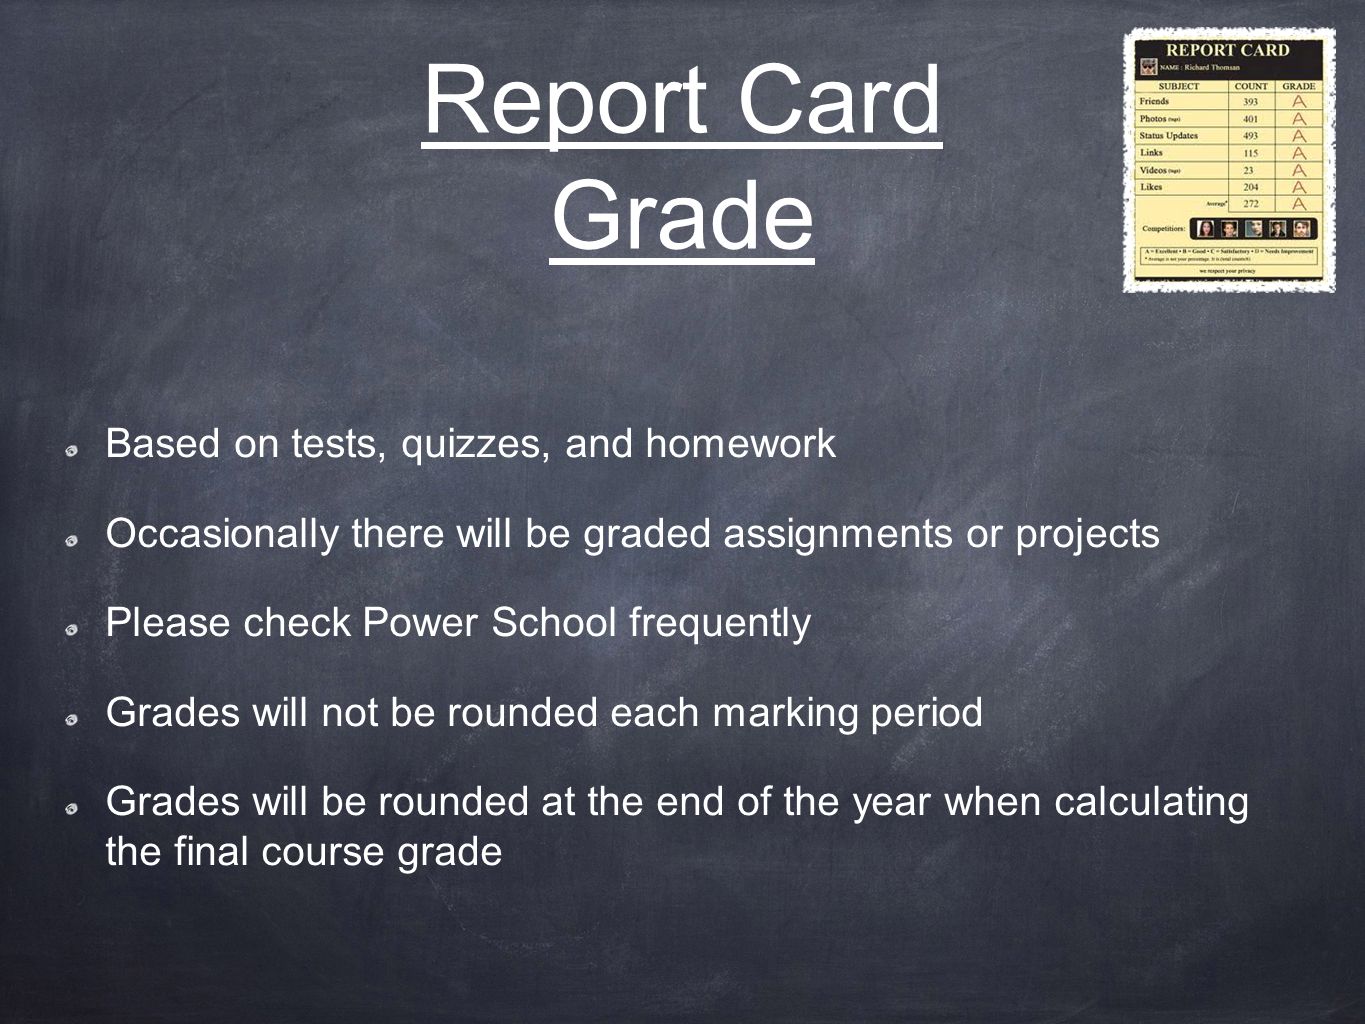 Report Card Grade Based on tests, quizzes, and homework Occasionally there will be graded assignments or projects Please check Power School frequently Grades will not be rounded each marking period Grades will be rounded at the end of the year when calculating the final course grade